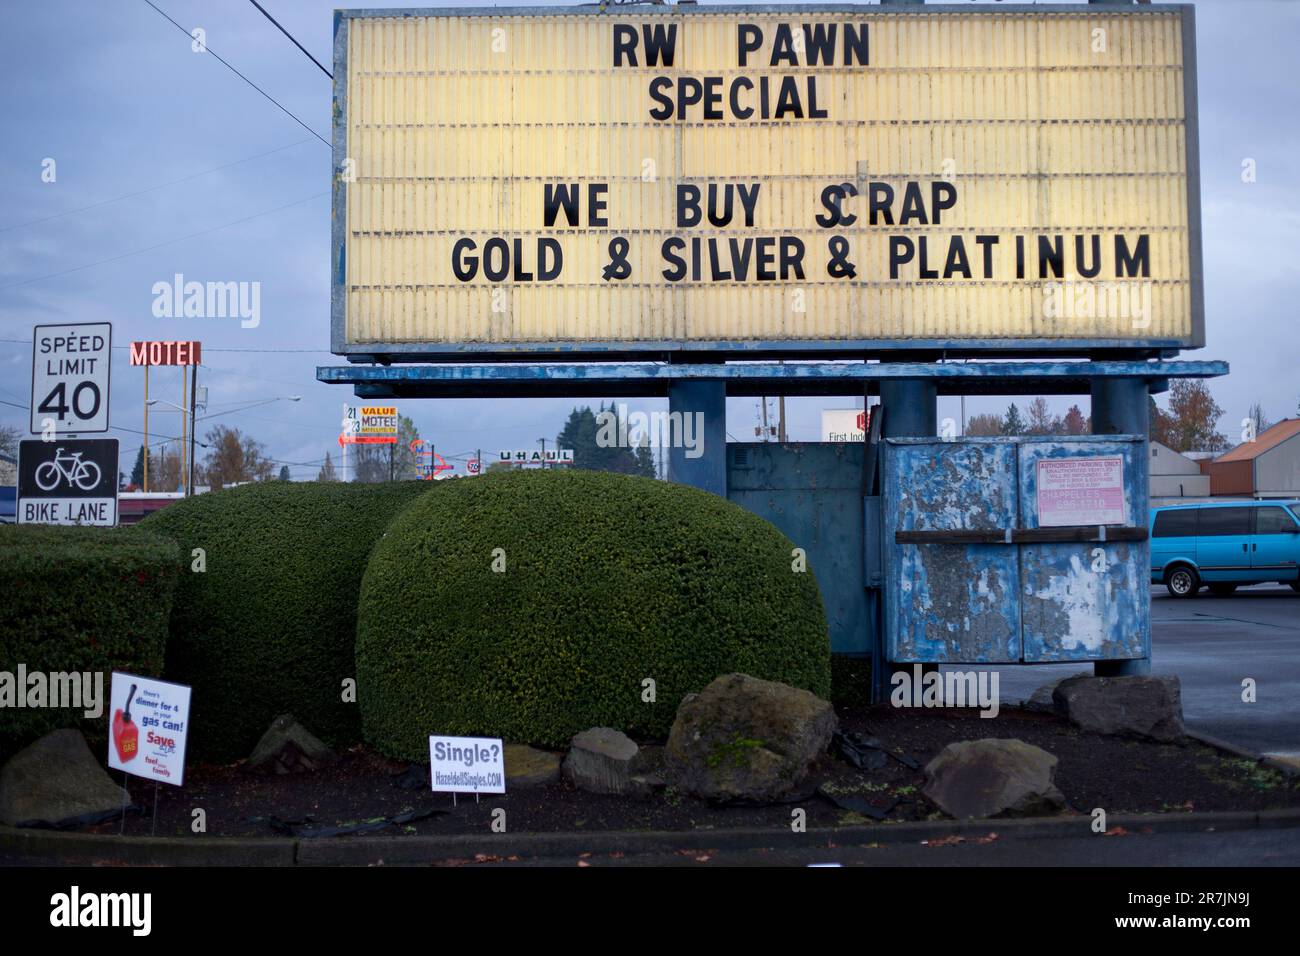 An old marqui outside a pawn shop indicates the shop purchases scrap metal in Vancouver, Washington. Stock Photo